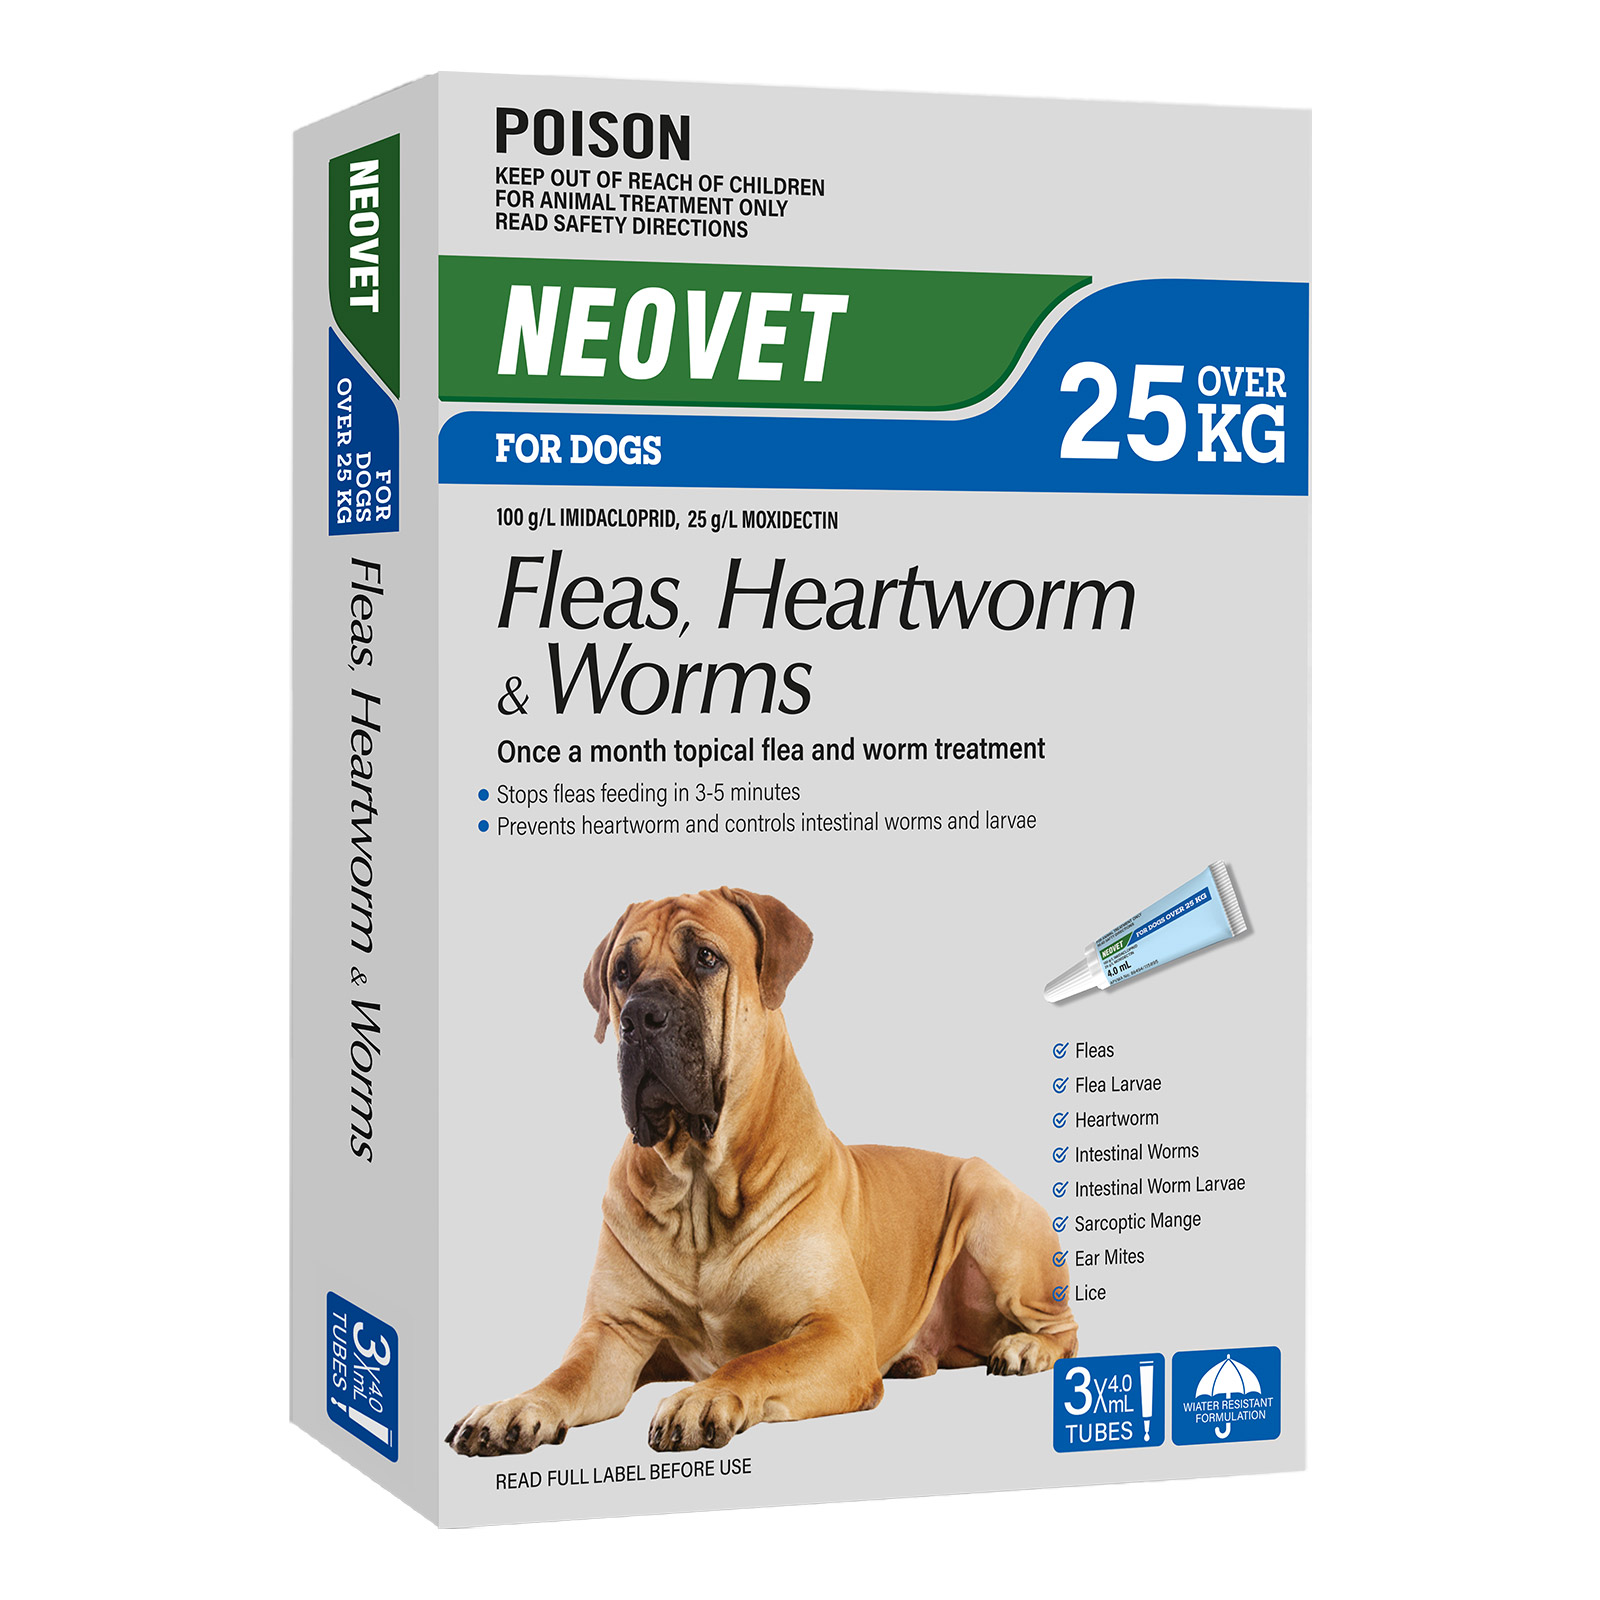 Neovet Spot-On For Extra Large Dogs Over 55.1lbs (Blue) 3 Pipettes
